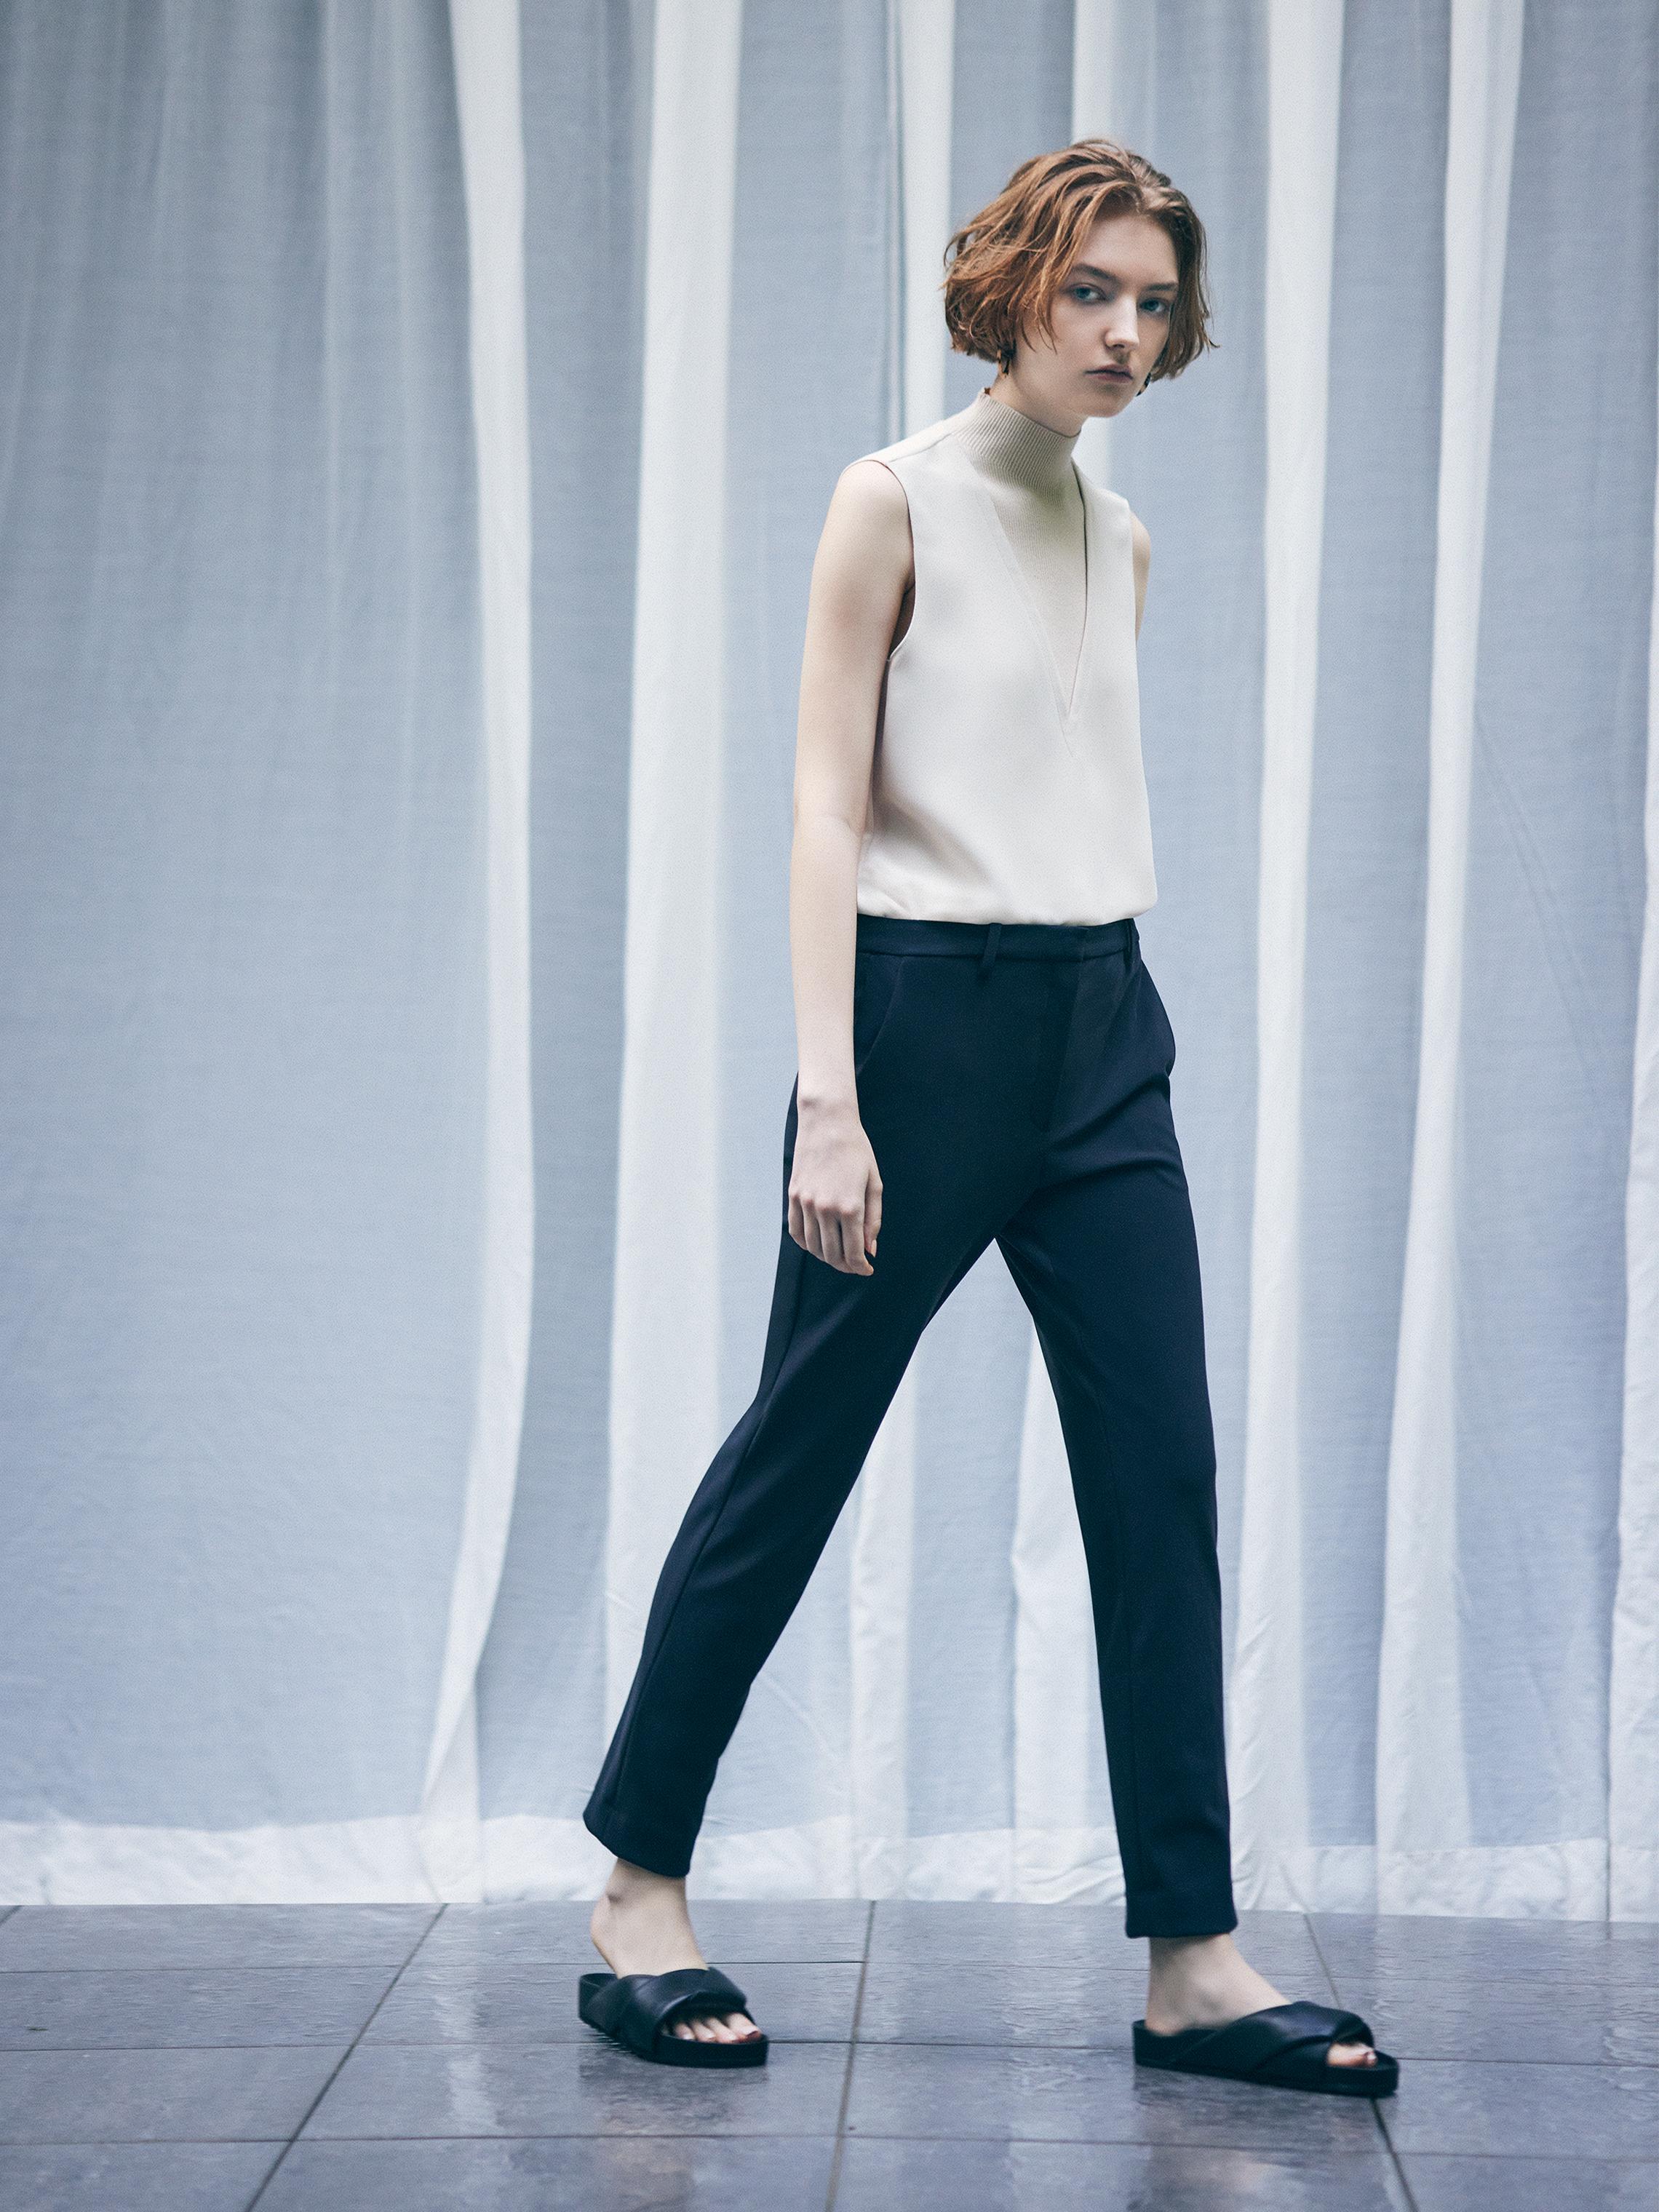 FUNCTIONAL PANT | WOMEN（レディース）｜Theory 公式通販サイト